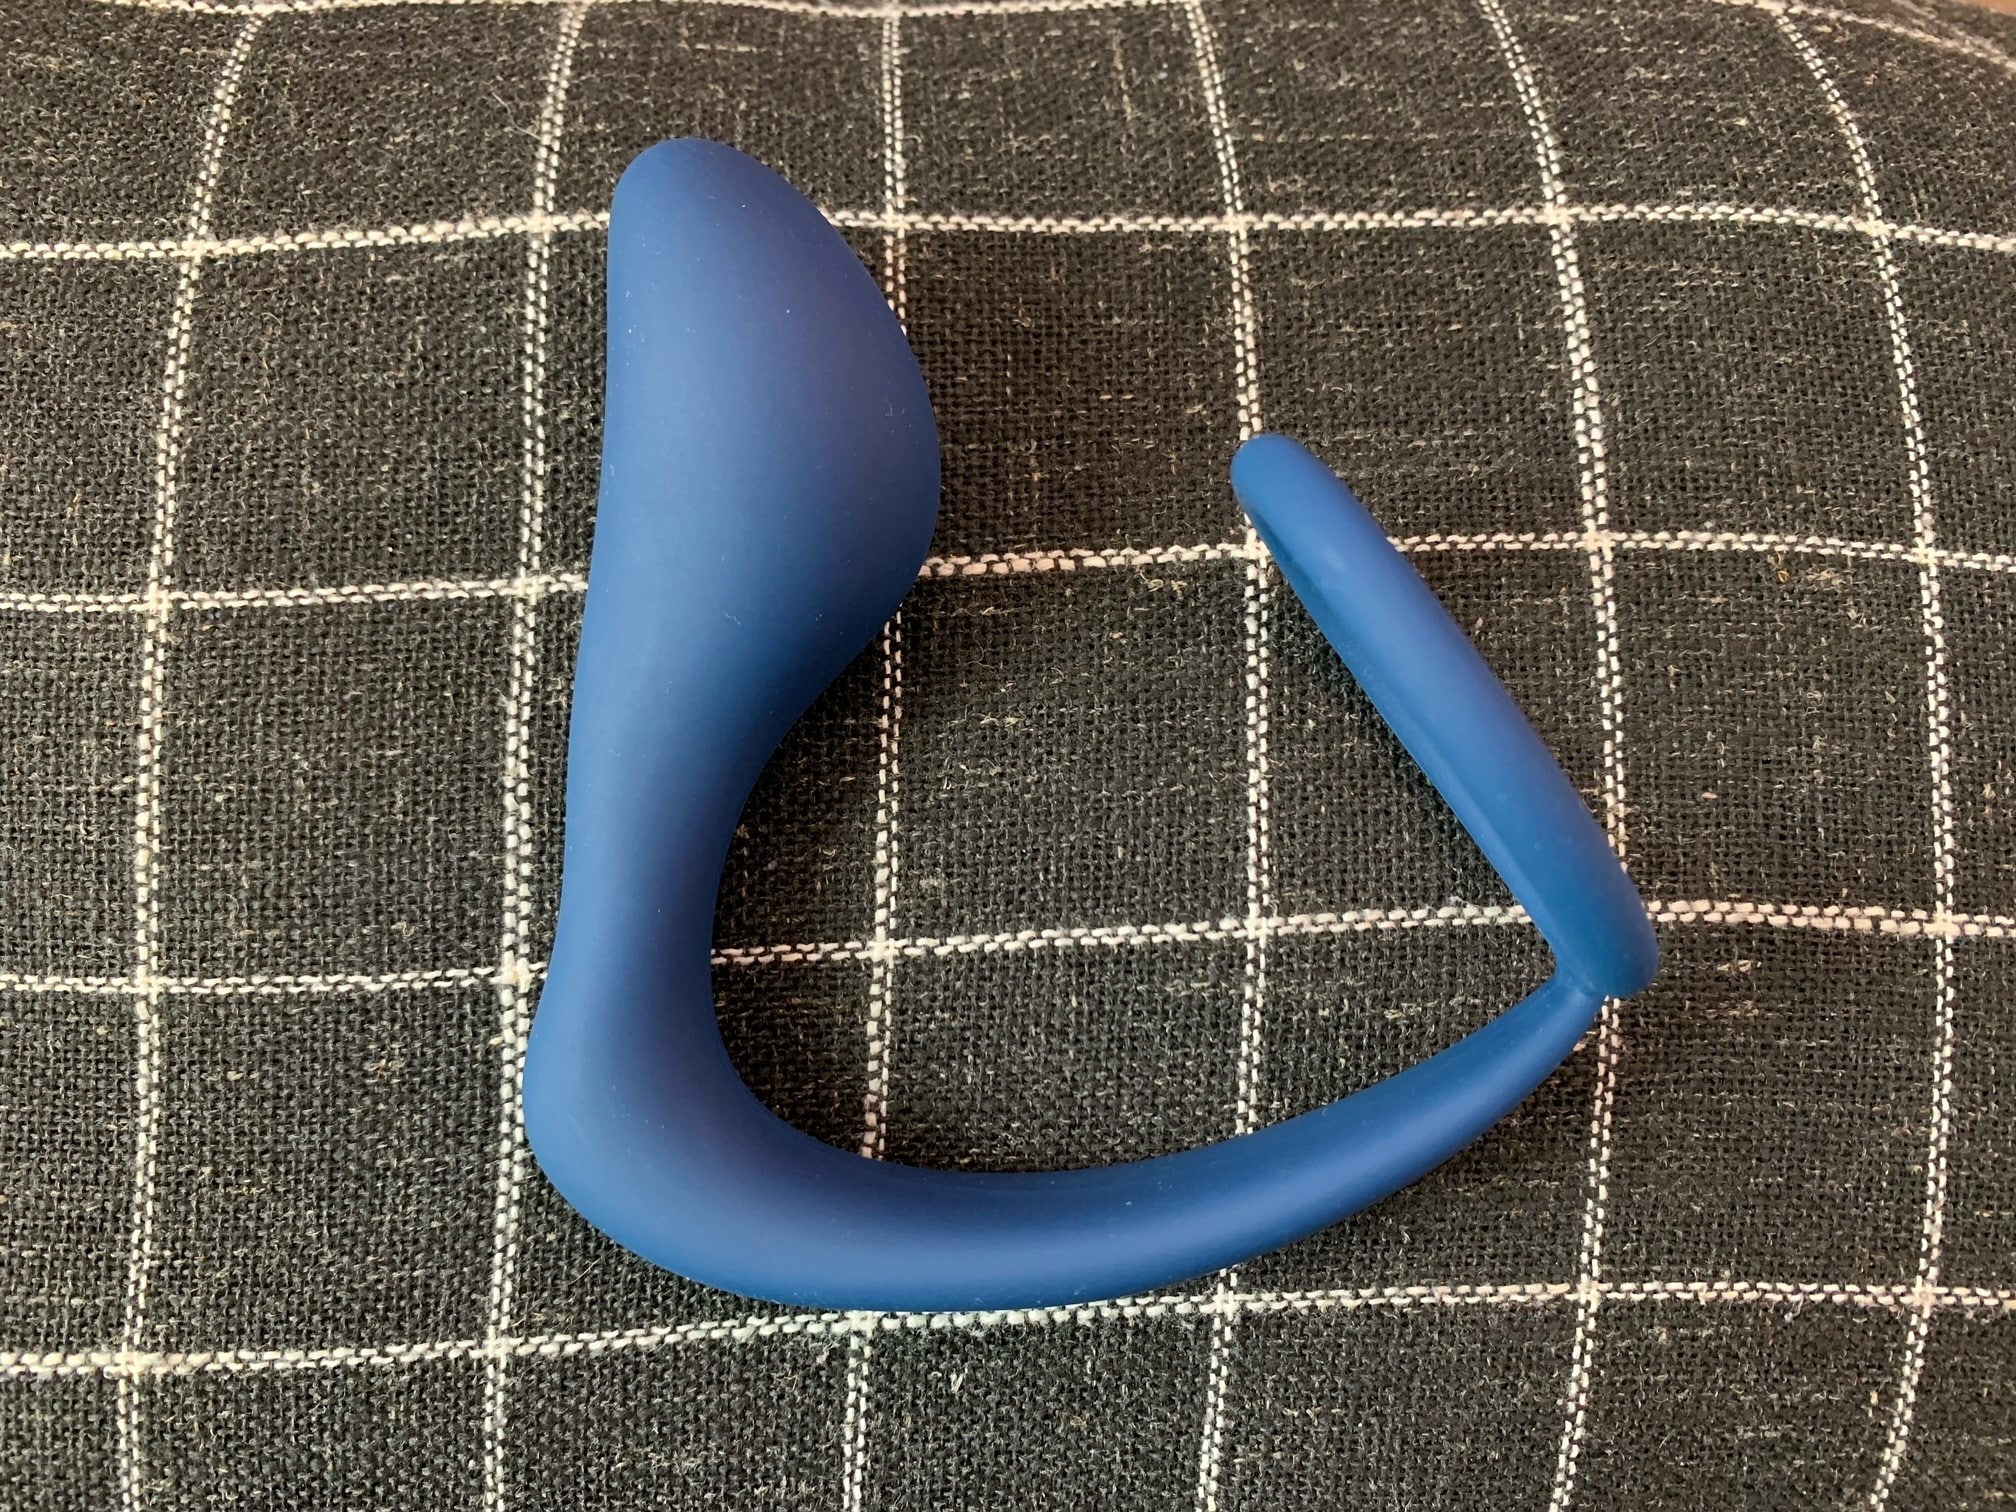 Lynk Plugged Cock Ring Prostate Massager. Slide 8